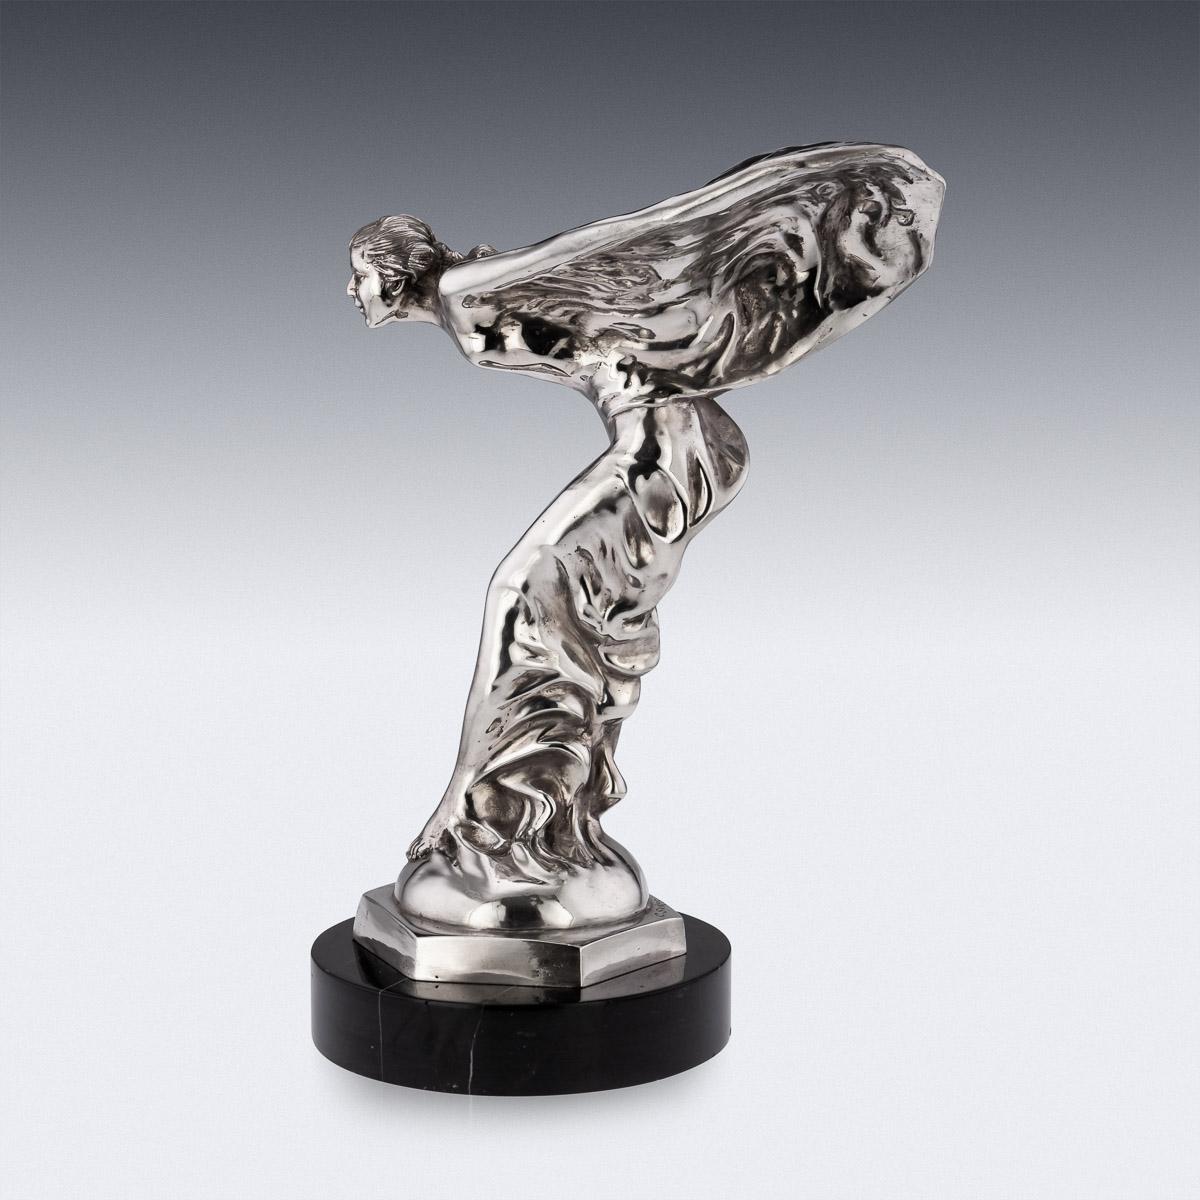 Stunning mid-20th century English silver plated showroom display model of the legendary Rolls-Royce mascot which was designed by Charles Sykes R.A.

Condition
In Great Condition - No Damage.

Size
Height: 50cm
Width: 35 x 28cm.